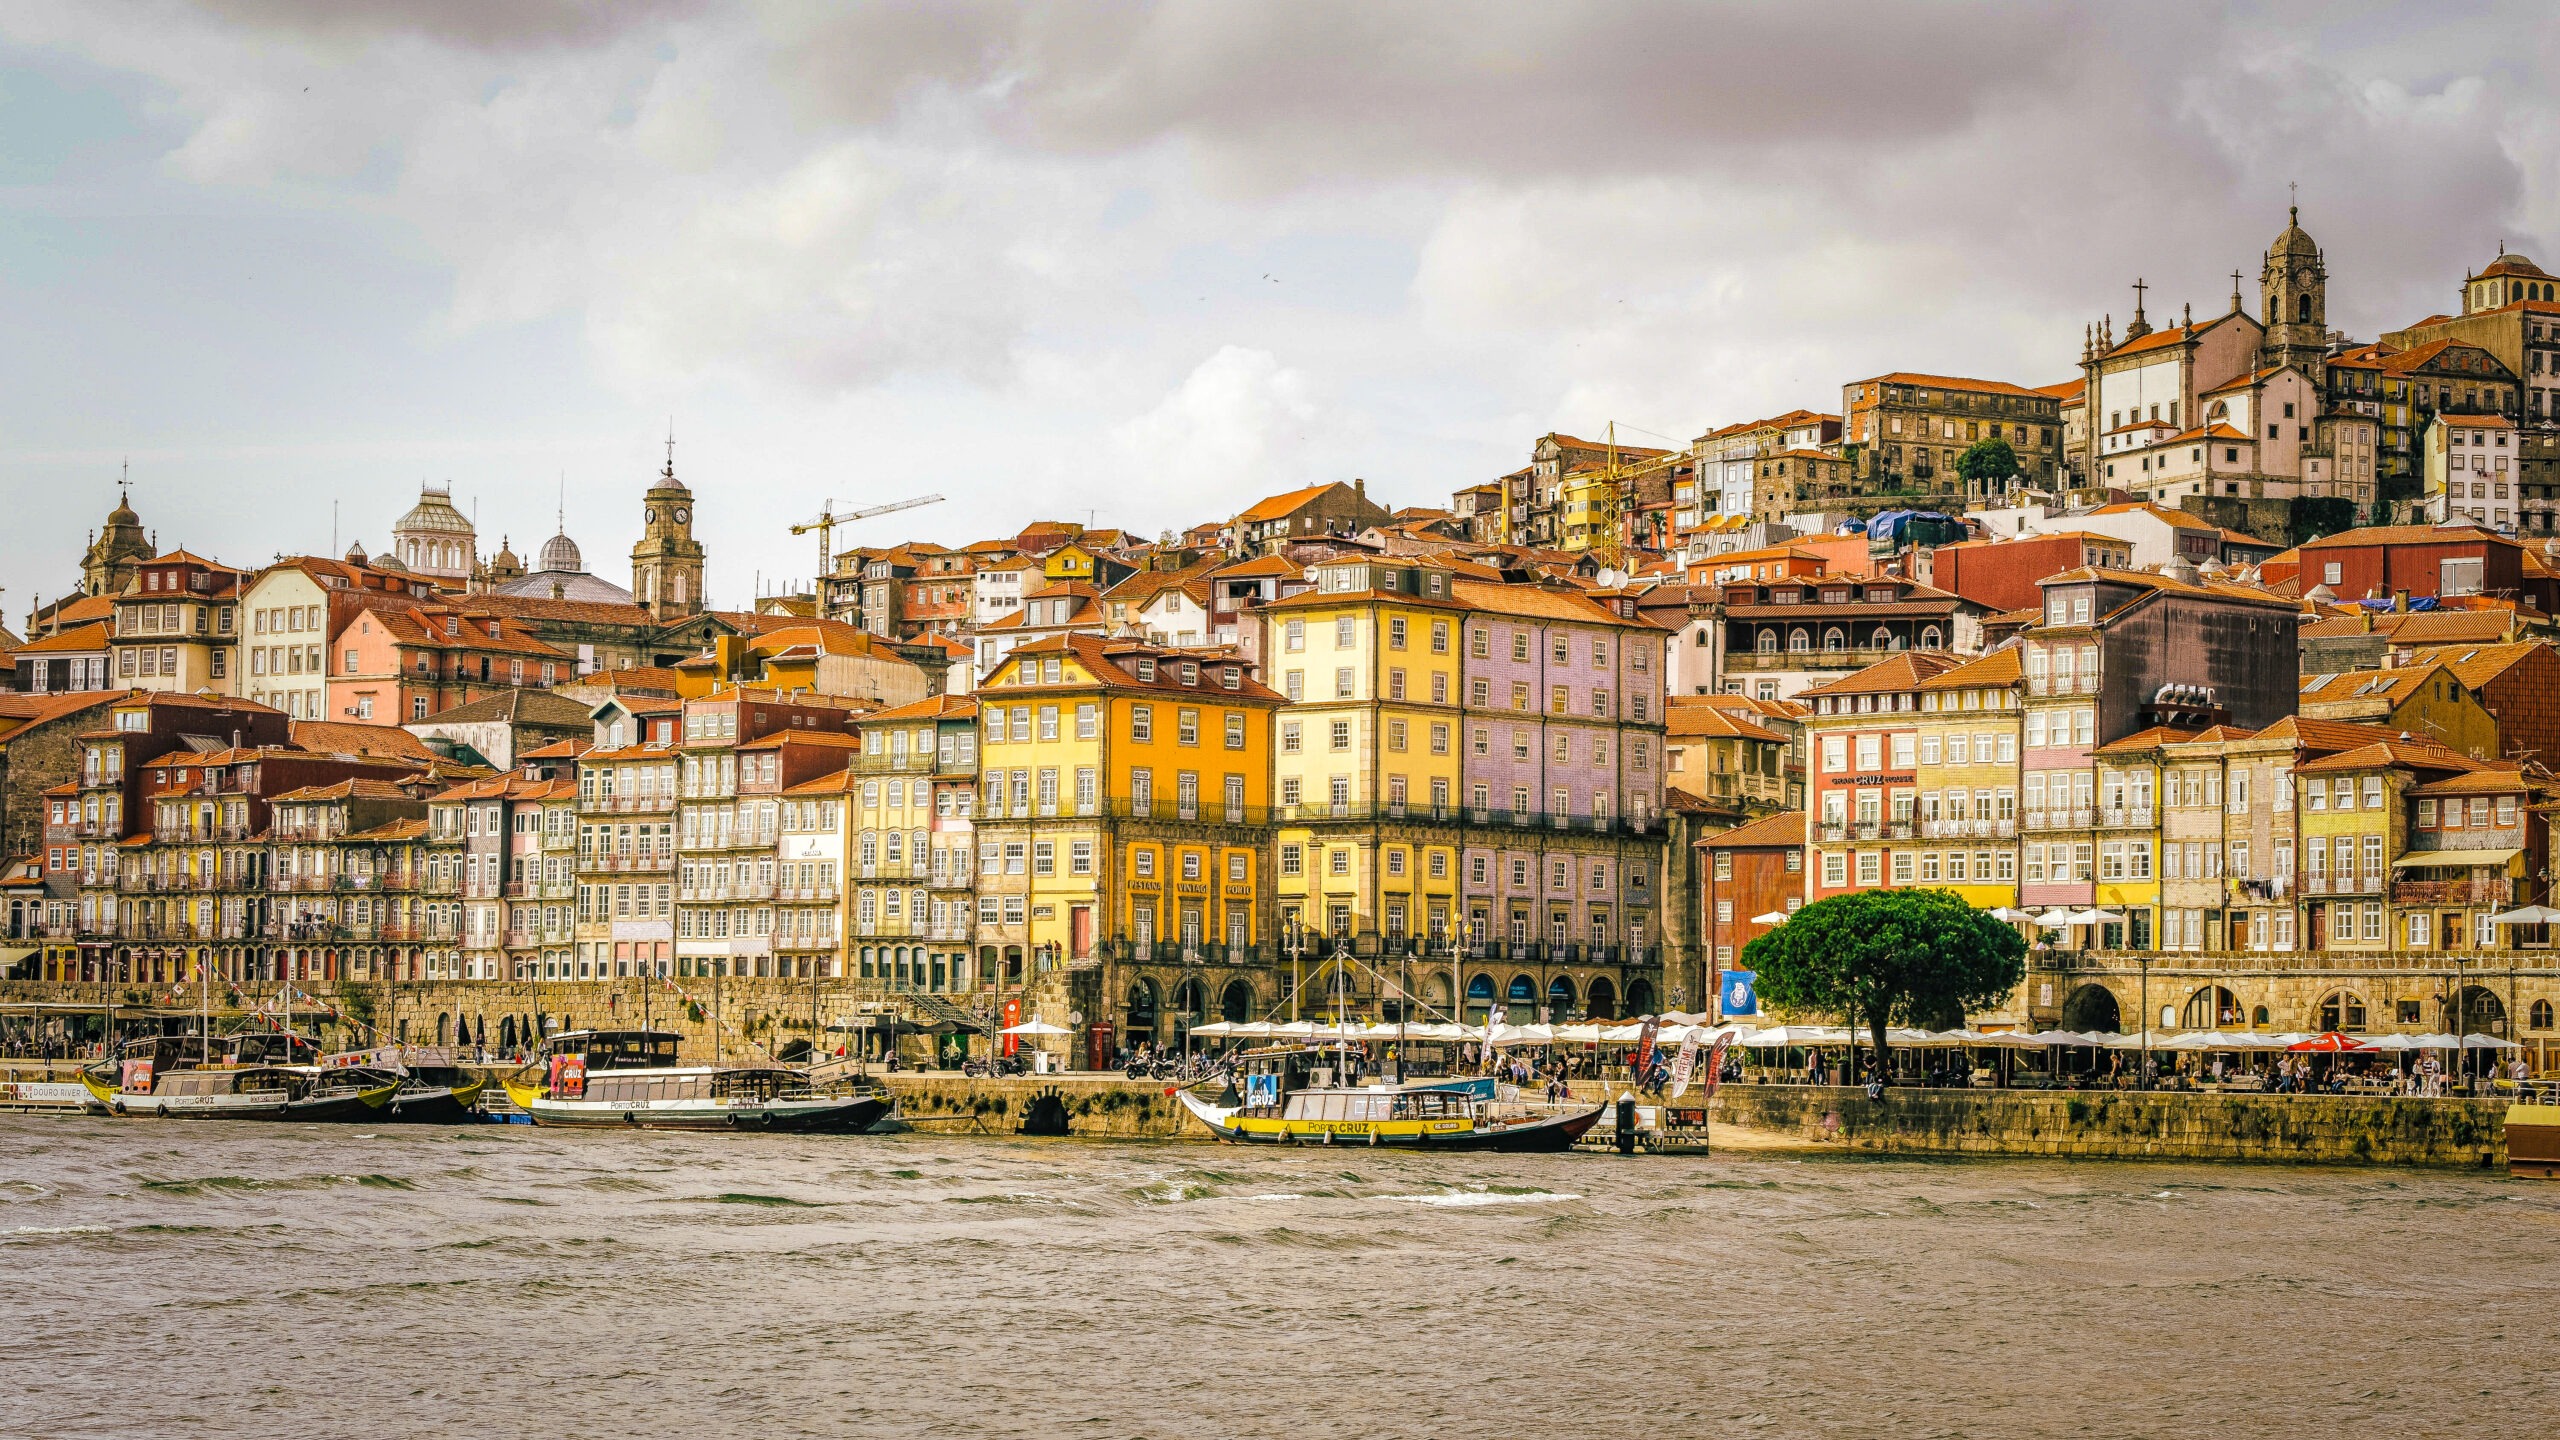 view of Douro river, boats and colourful houses of the riberia district in porto